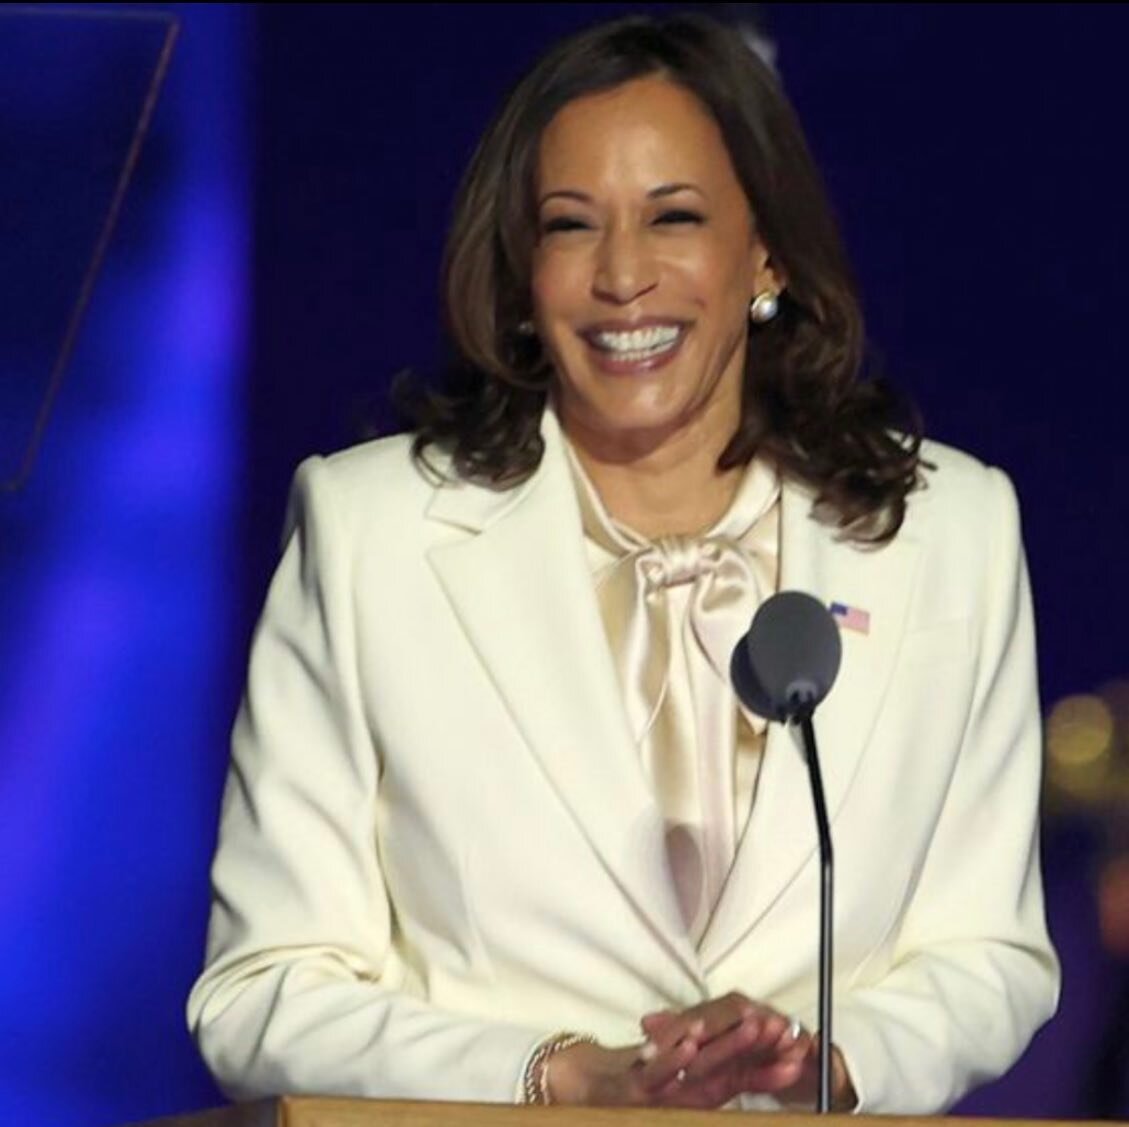 Kamala was luminous in white last night, just as the early 20th century suffragists planned, so that they would been seen more prominently at their marches, rallies, and in newspaper photos.  Remember, this brilliant idea came from women who had no p